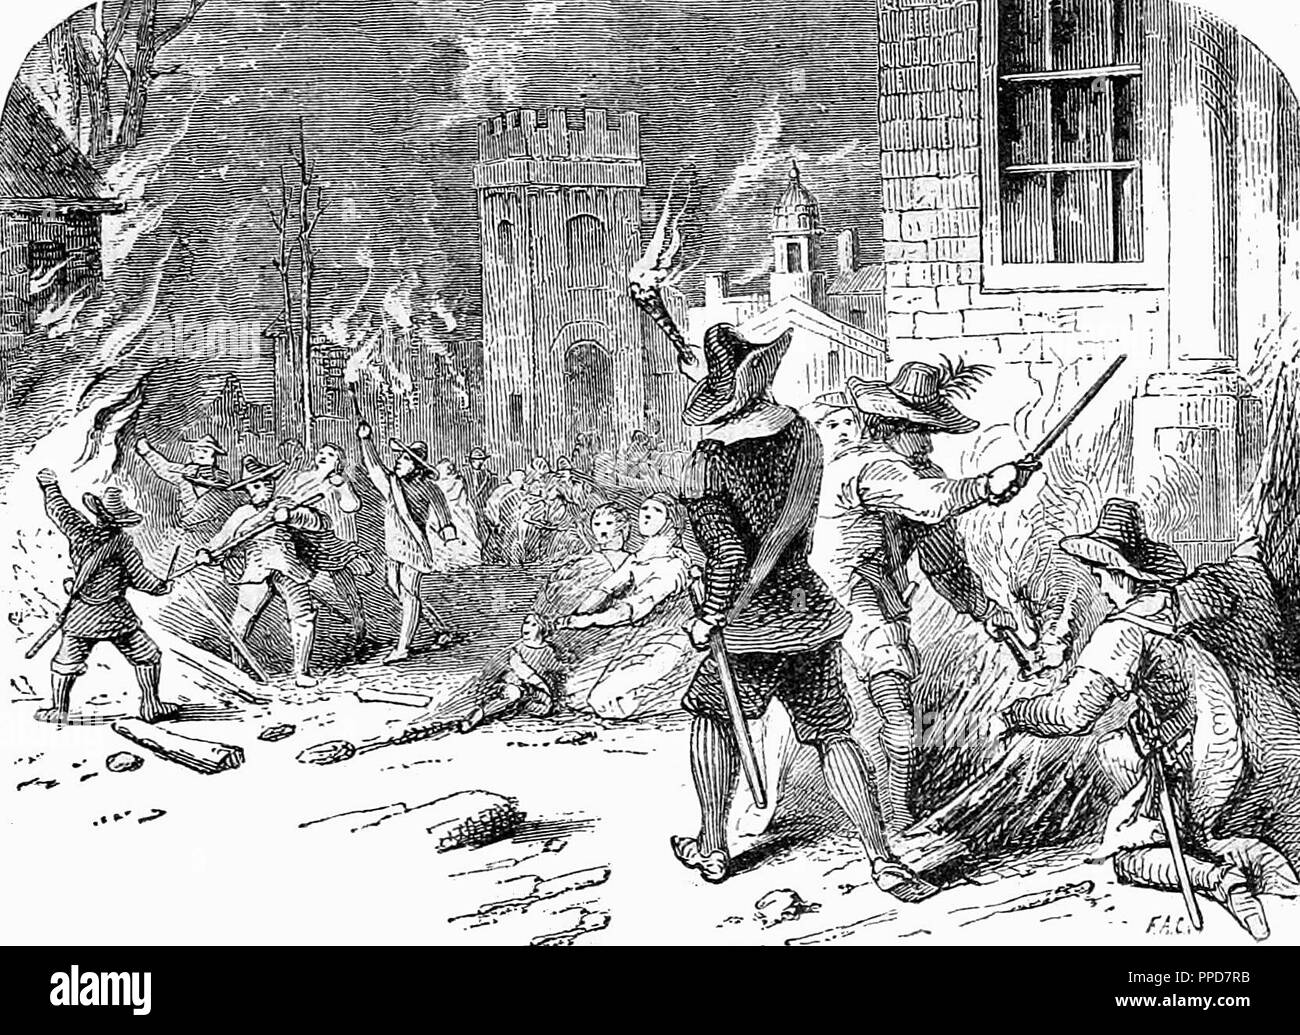 Bacons Rebellion in Jamestown, 1676 available as Framed Prints